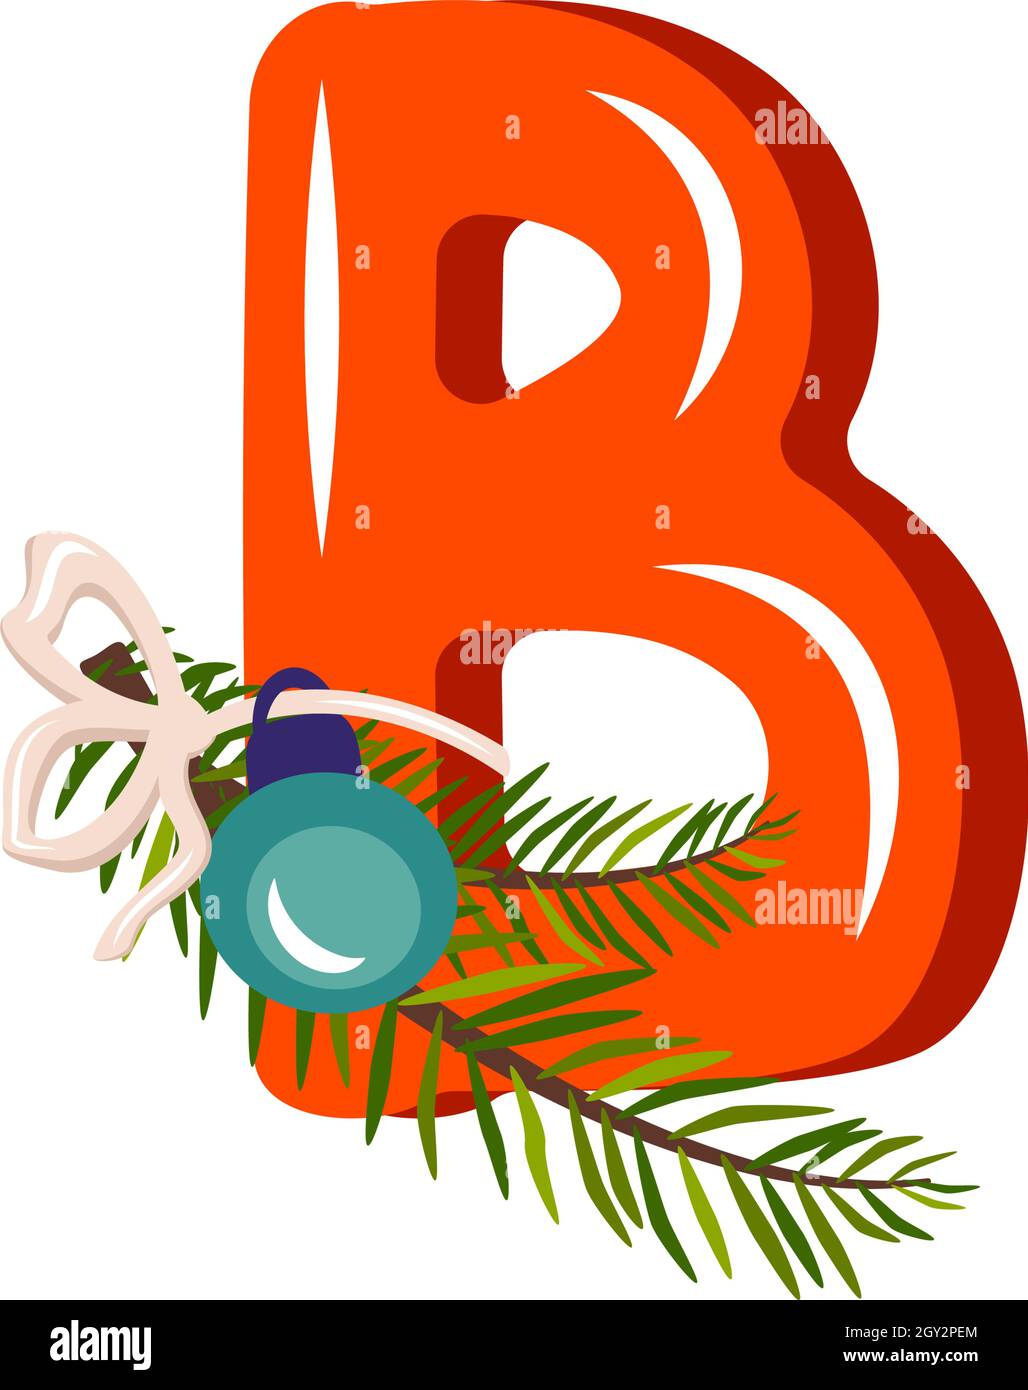 https://c8.alamy.com/comp/2GY2PEM/red-letter-b-with-green-christmas-tree-branch-ball-with-bow-festive-font-for-happy-new-year-and-bright-alphabet-2GY2PEM.jpg